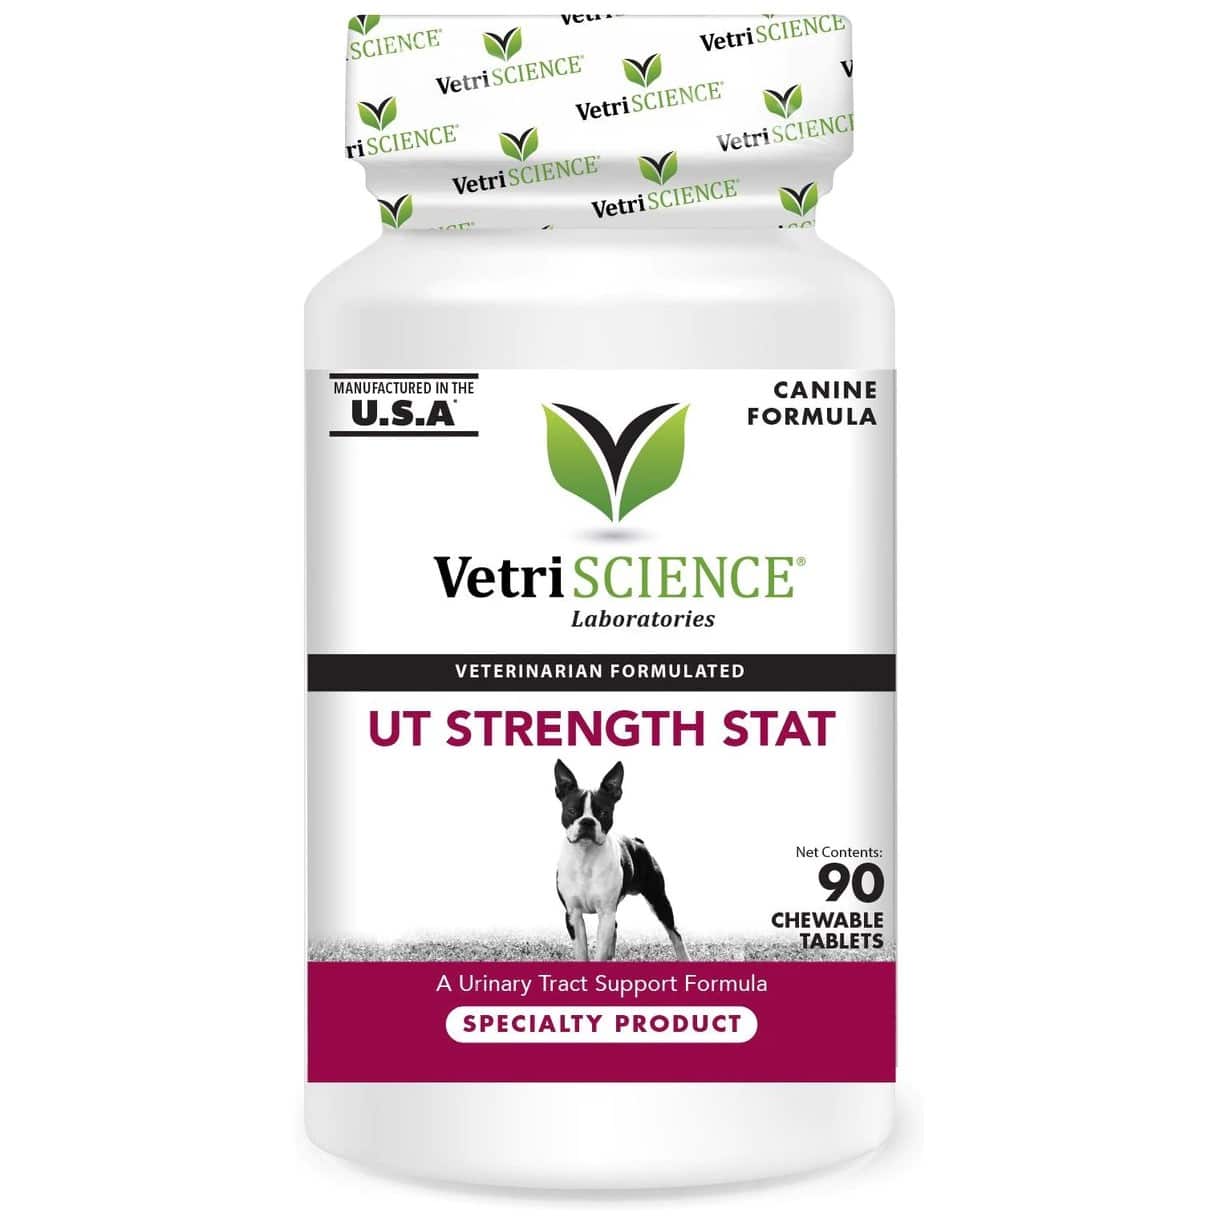 VetriScience UT Strength Stat Chewable Tablets Urinary Supplement for Dogs